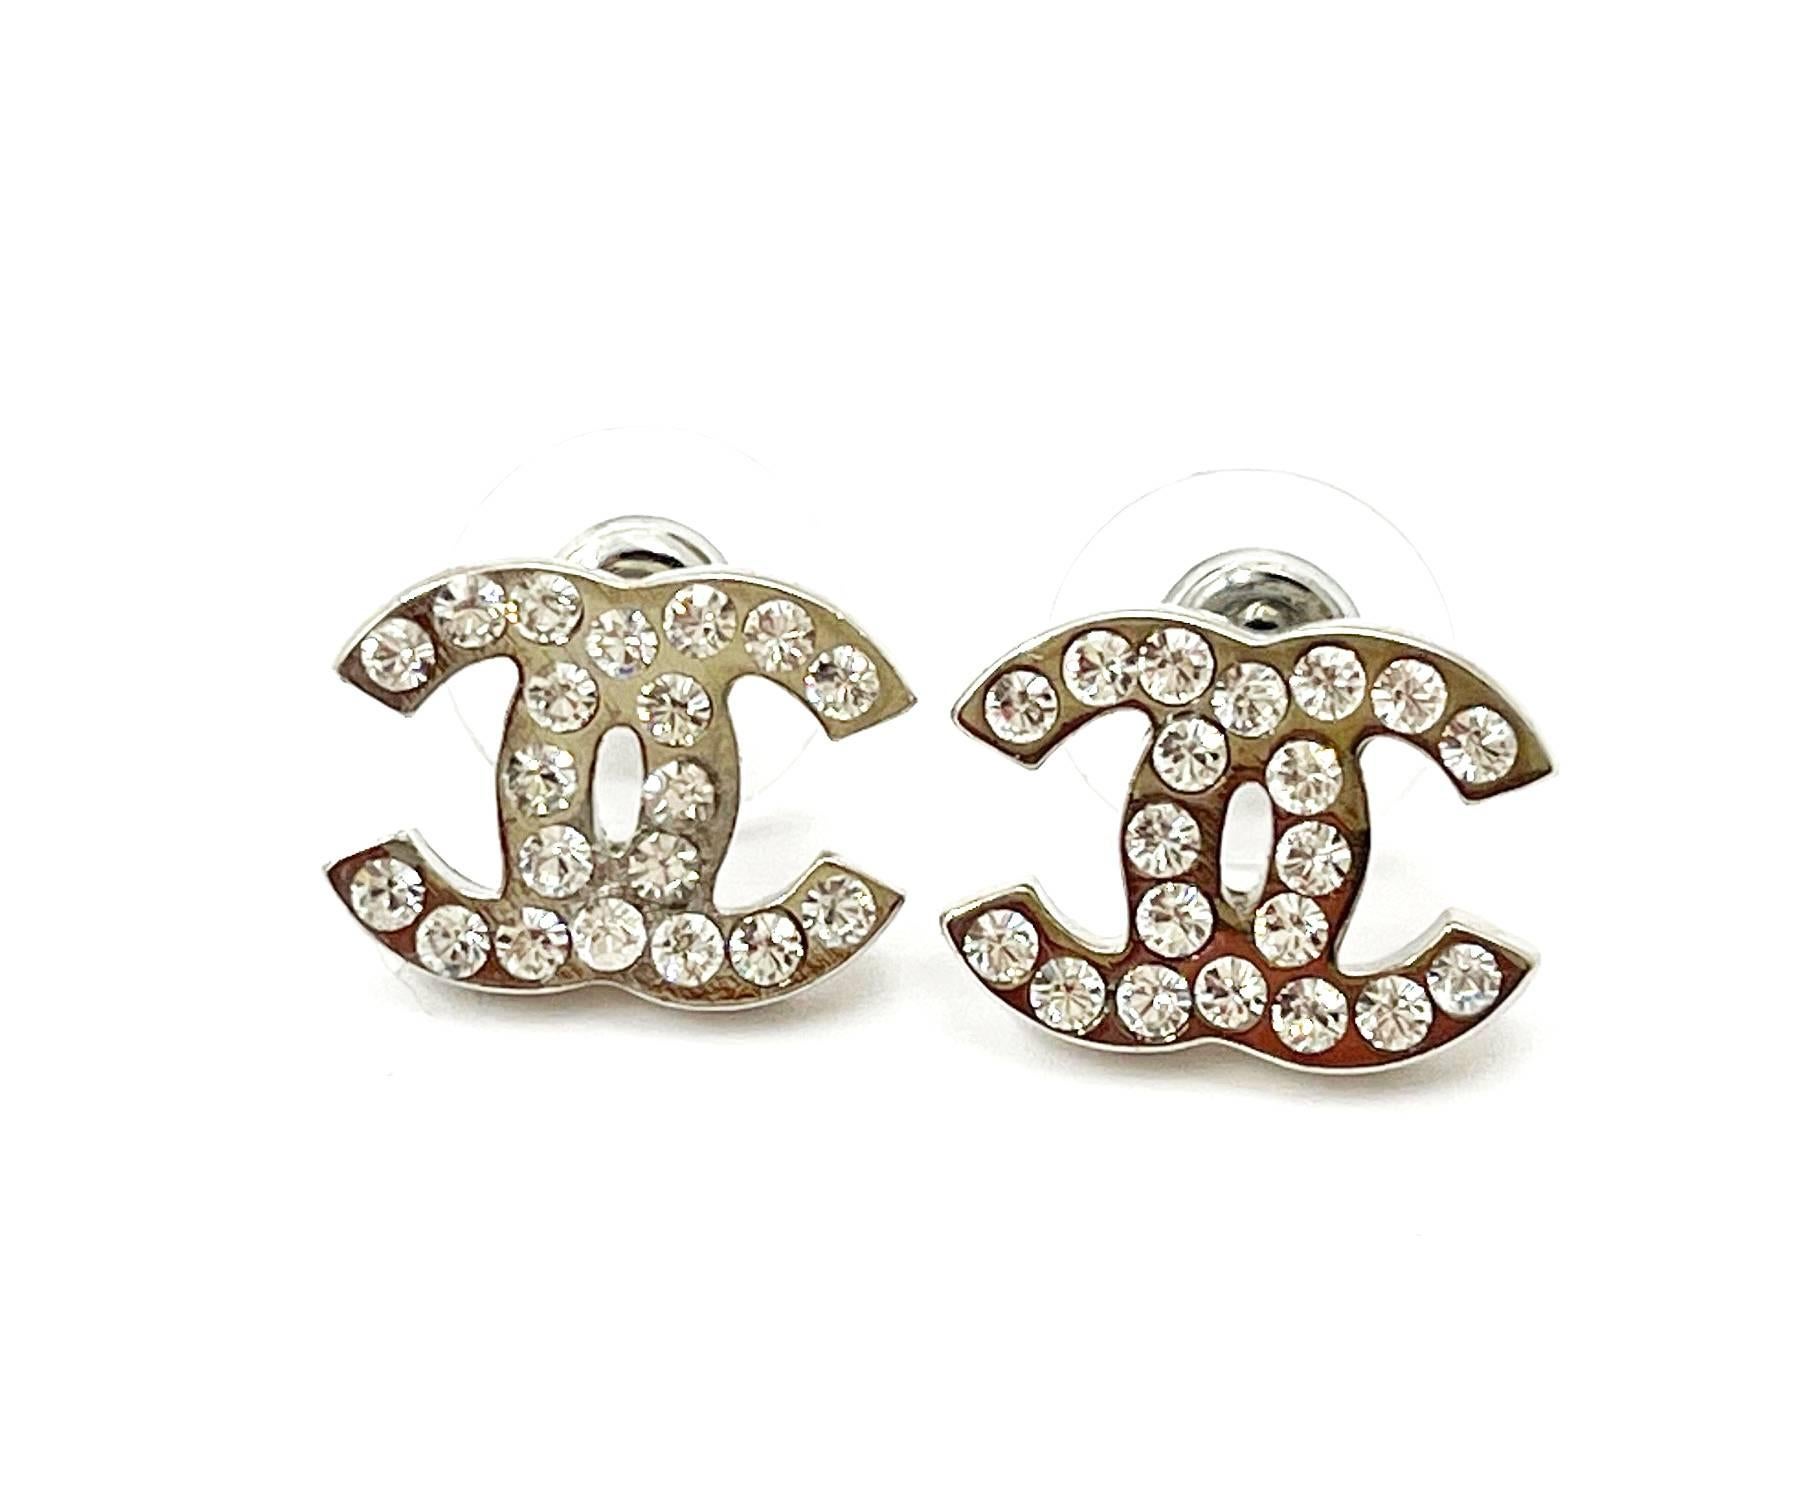 Chanel Classic Silver CC Crystal Medium Piercing Earrings

*Marked 08
*Made in France

-It is approximately 0.6